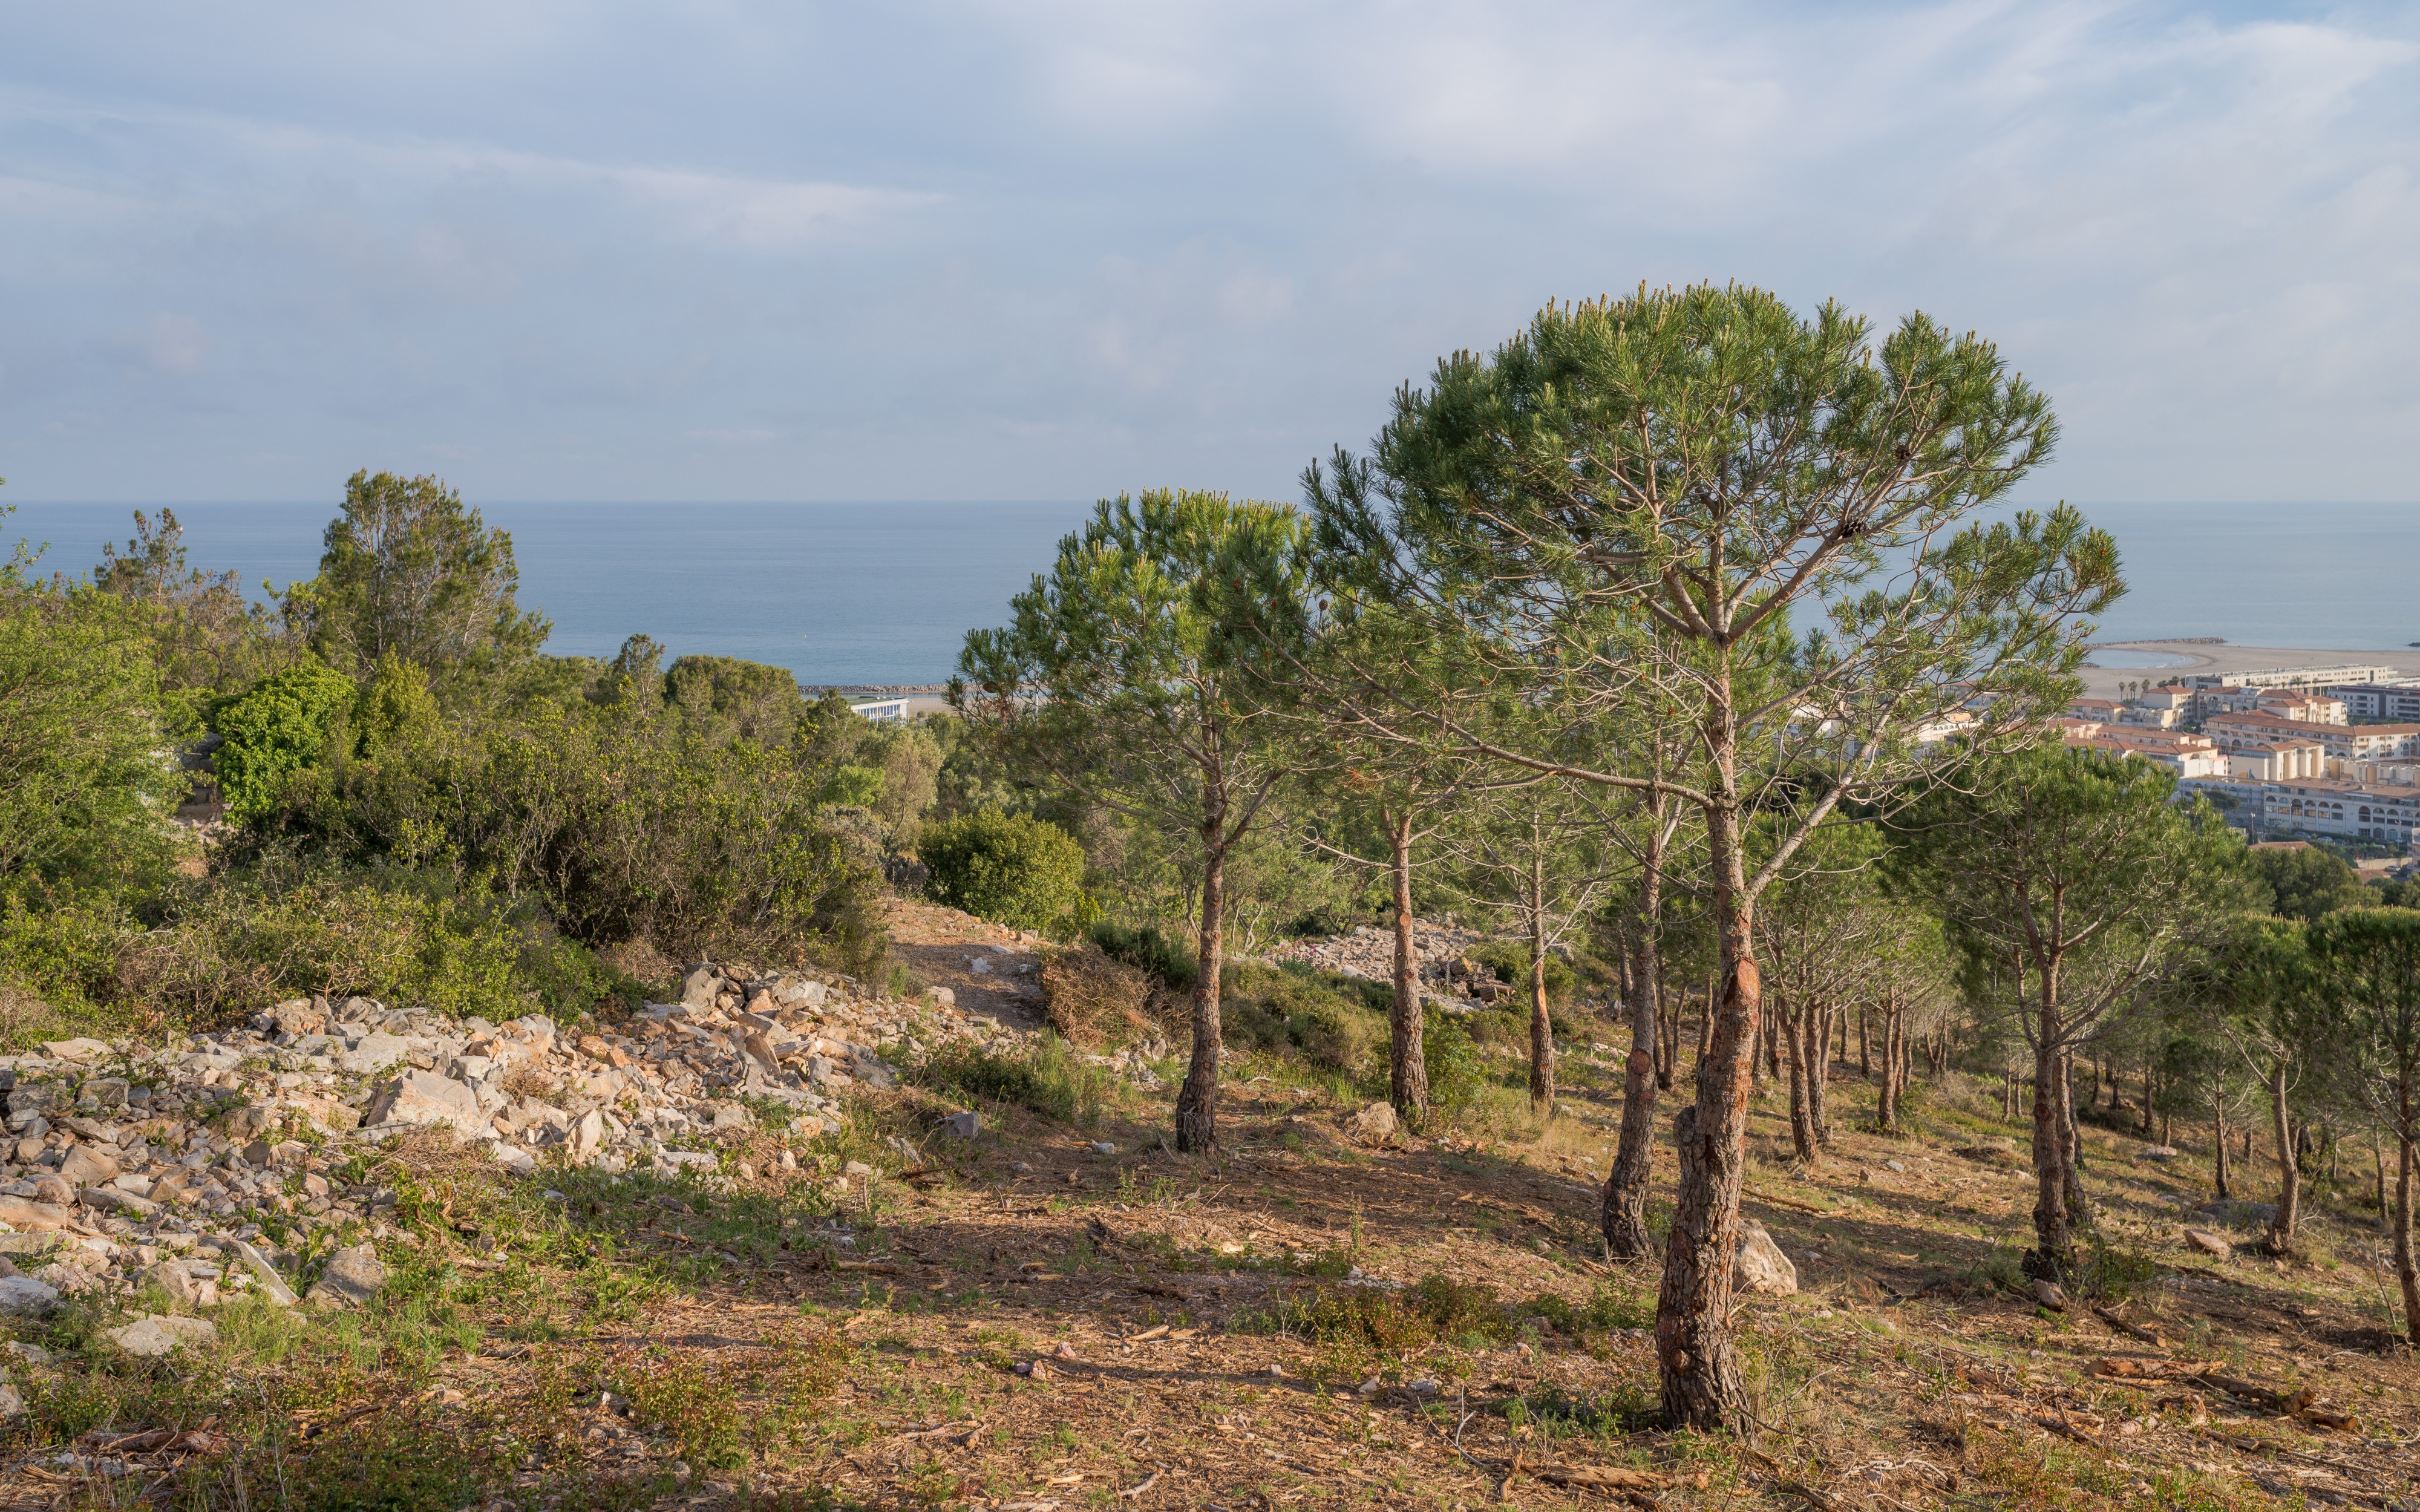 Pine forest of Sète 02